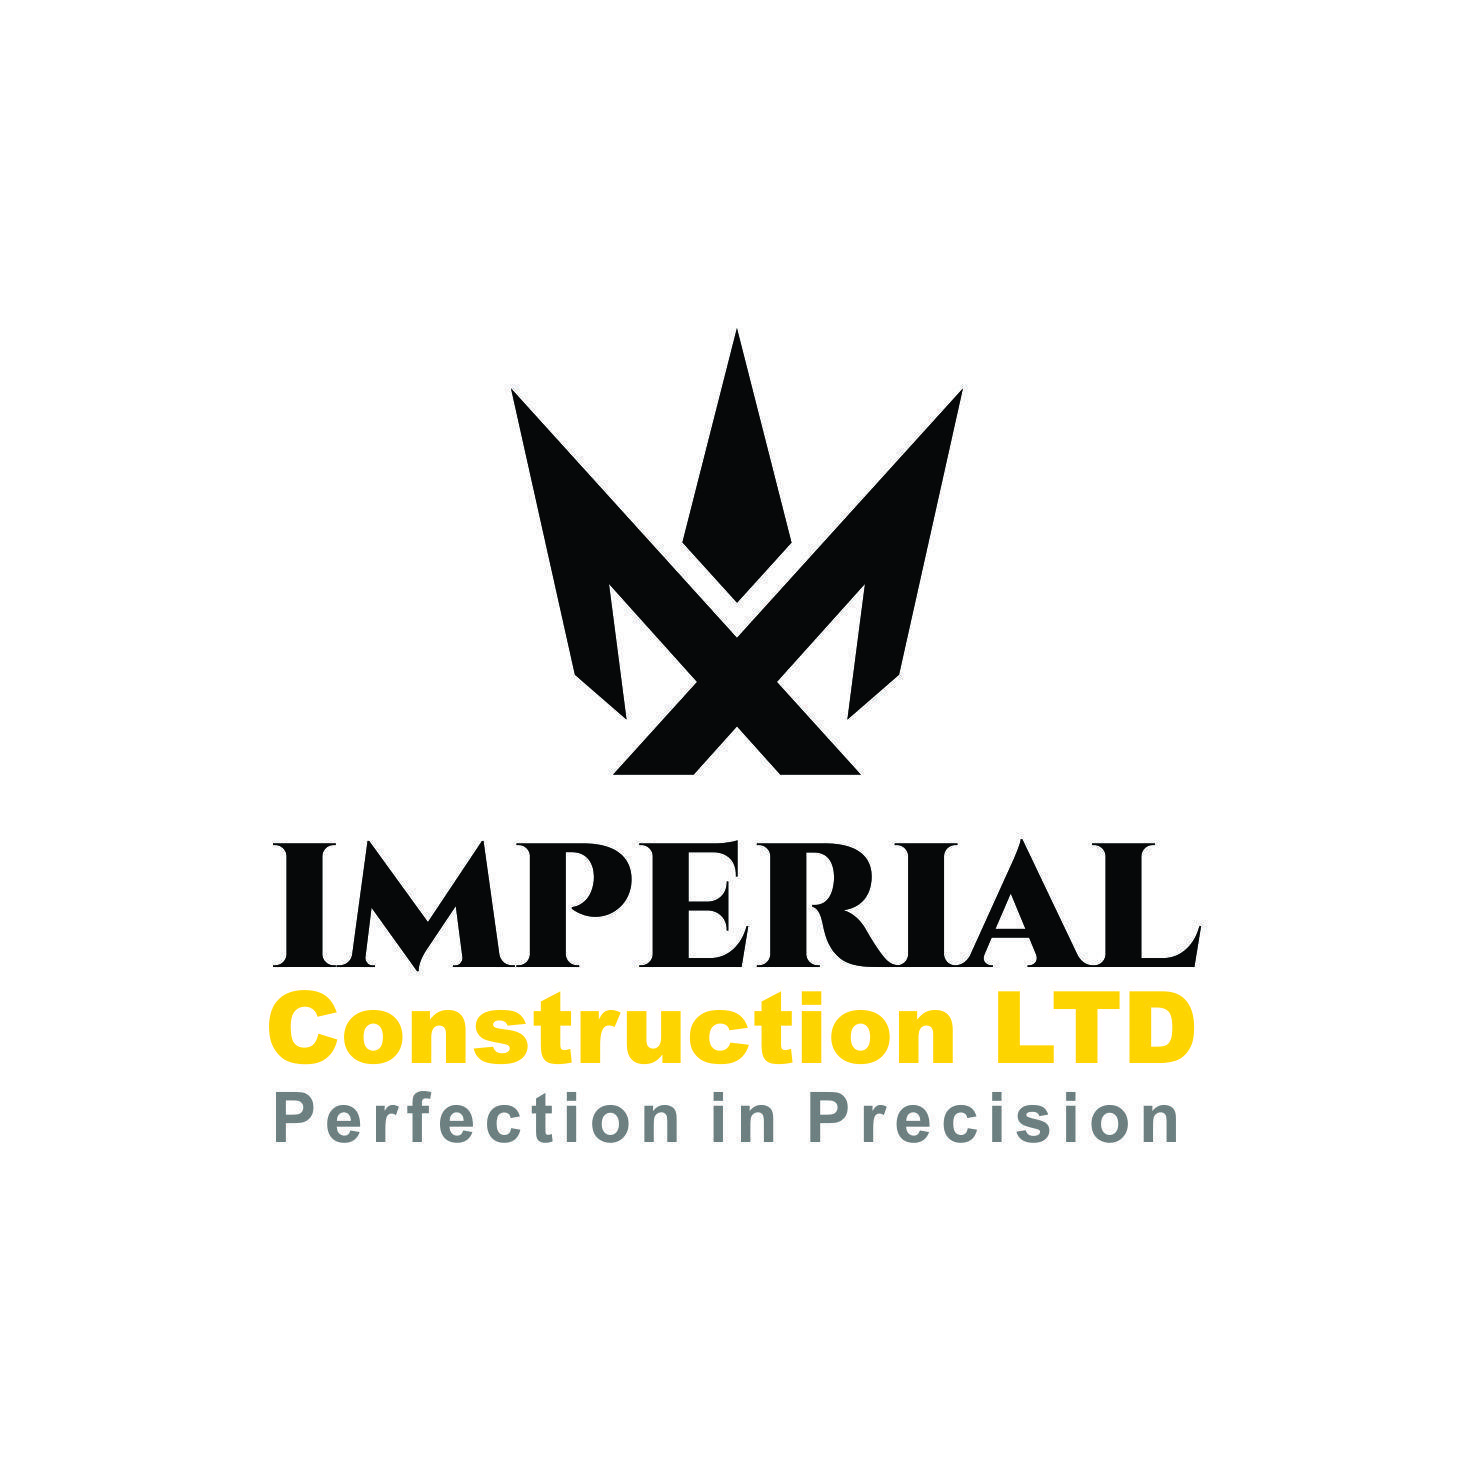 Imperial Logo - Modern, Professional, Construction Logo Design for Imperial